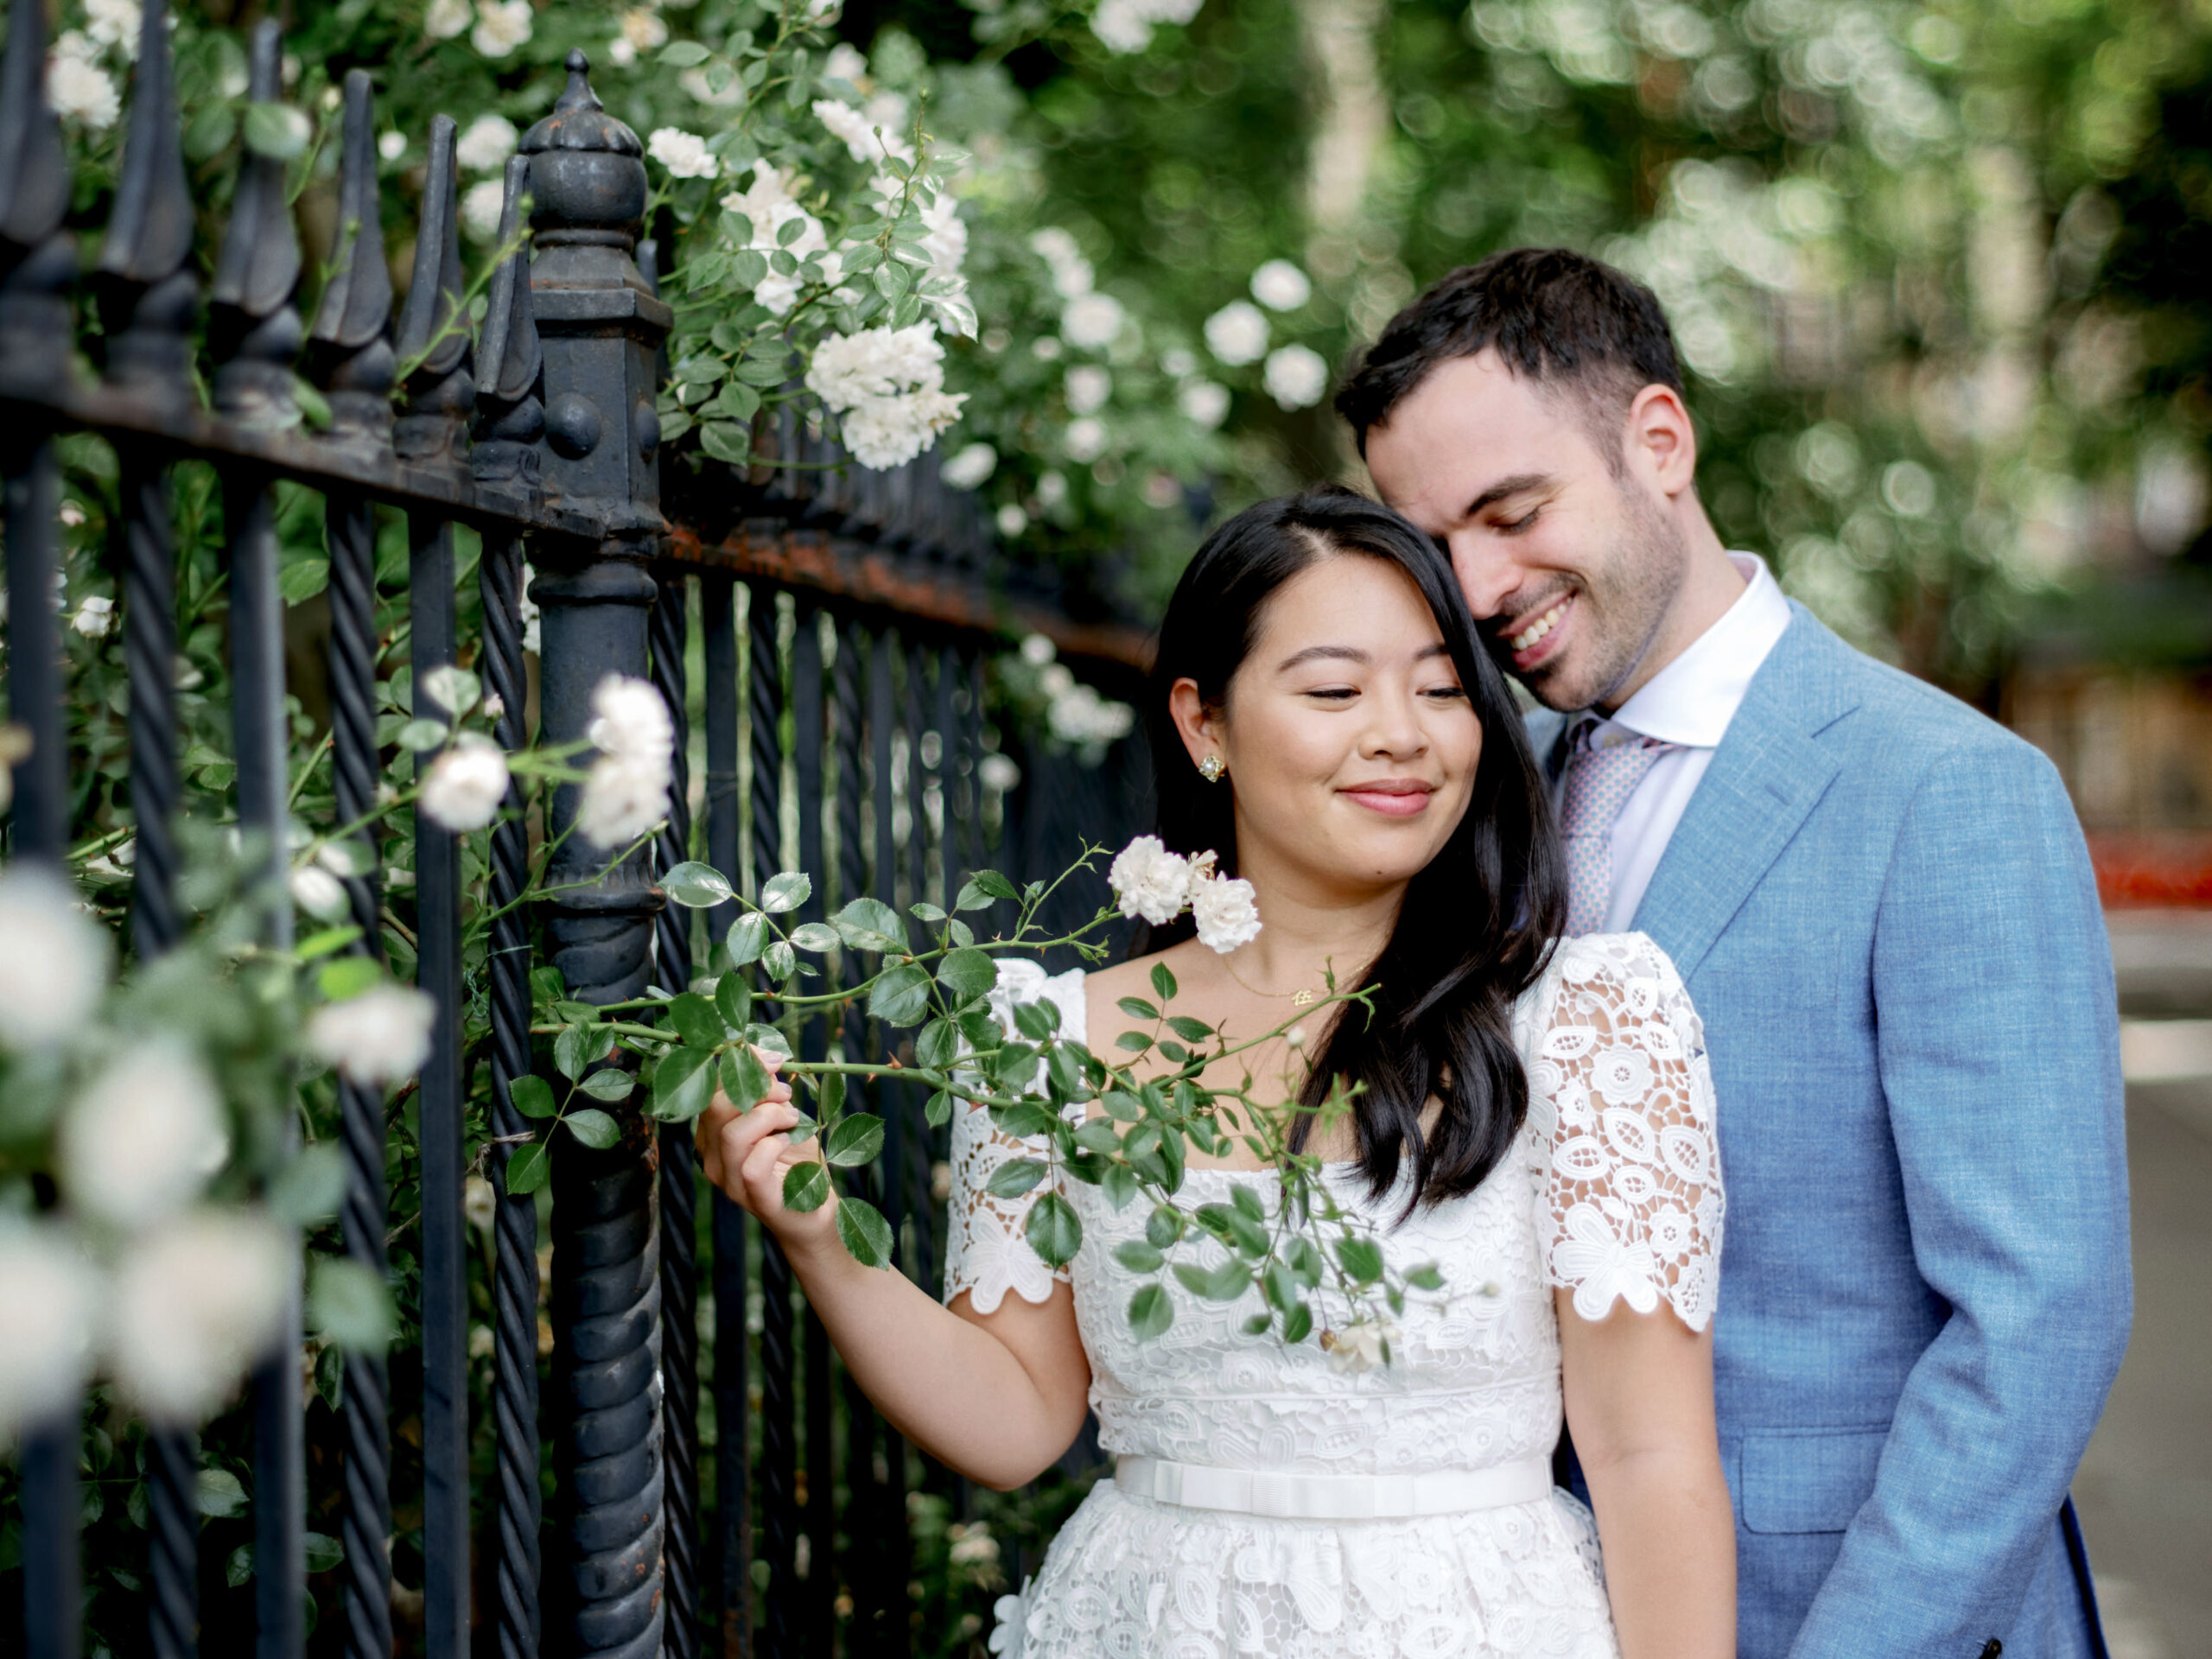 Engagement session in the streets of New York. Wedding photography add-ons image by Jenny Fu Studio